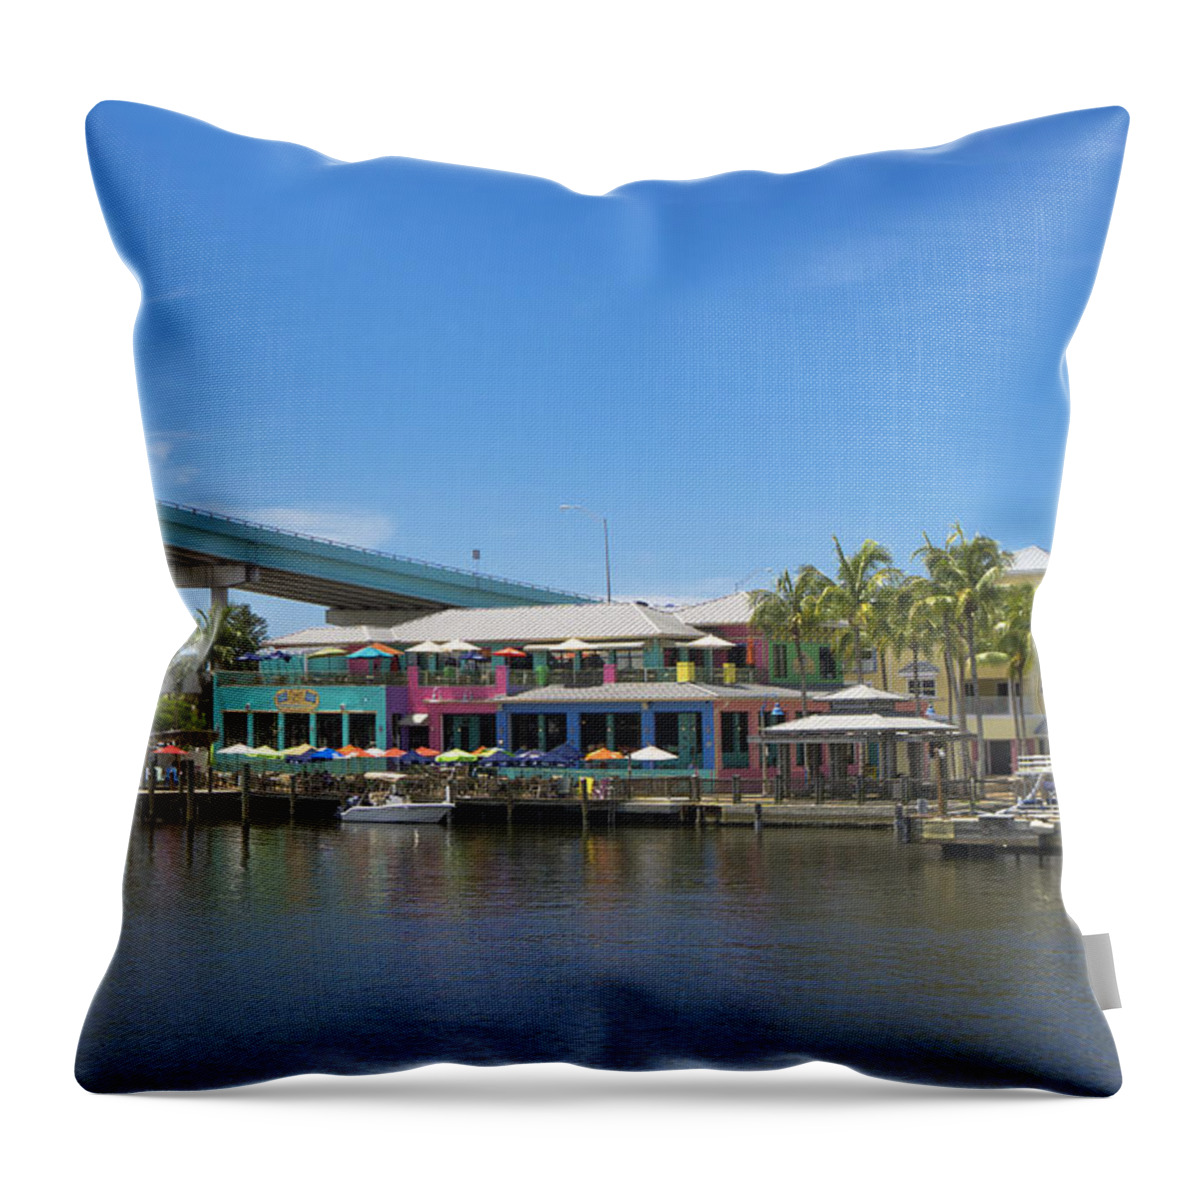 Restaurant Throw Pillow featuring the photograph Nervous Nelly's by Sean Allen